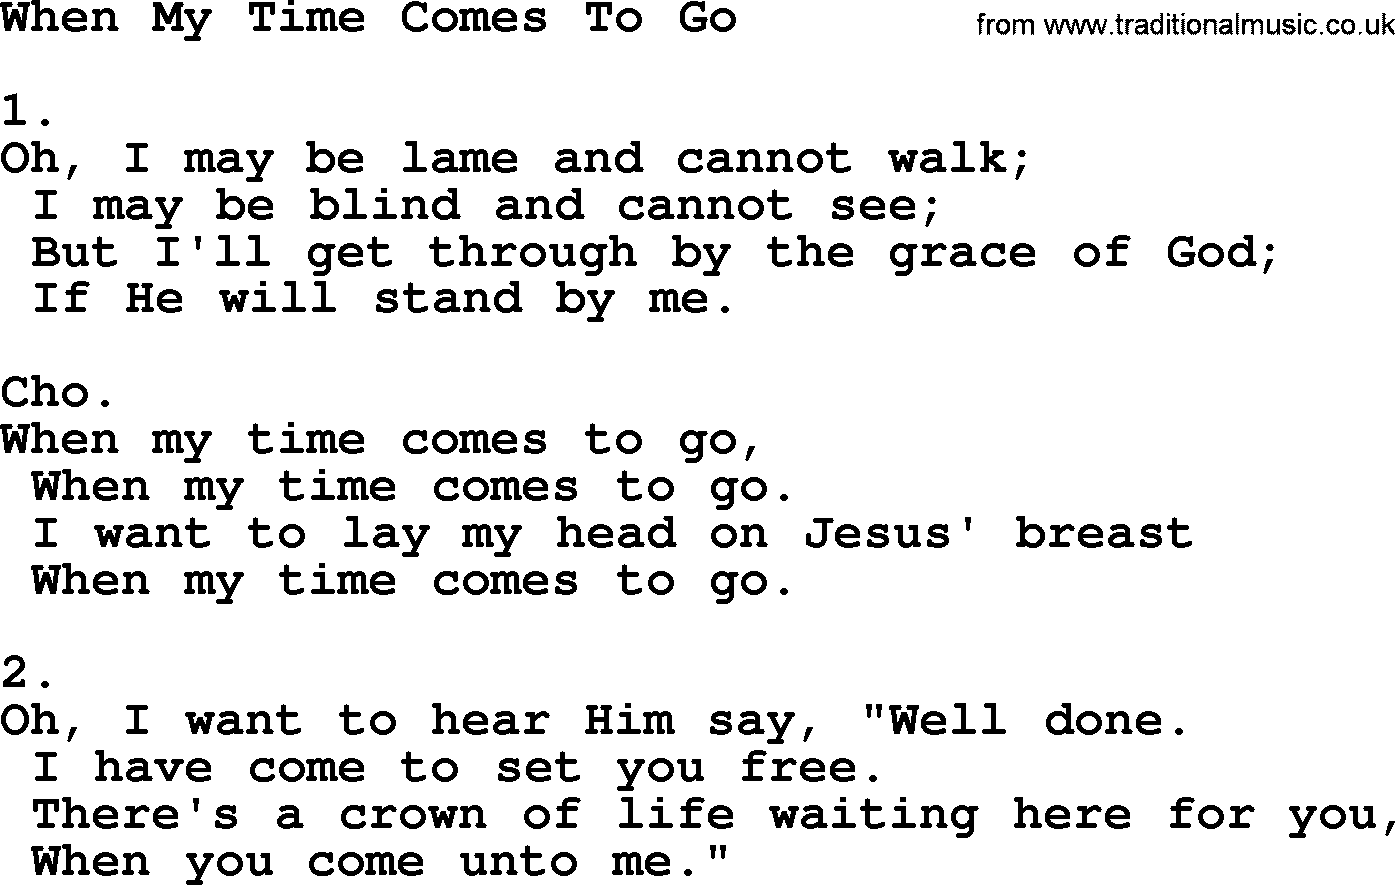 Apostolic & Pentecostal Hymns and Songs, Hymn: When My Time Comes To Go lyrics and PDF